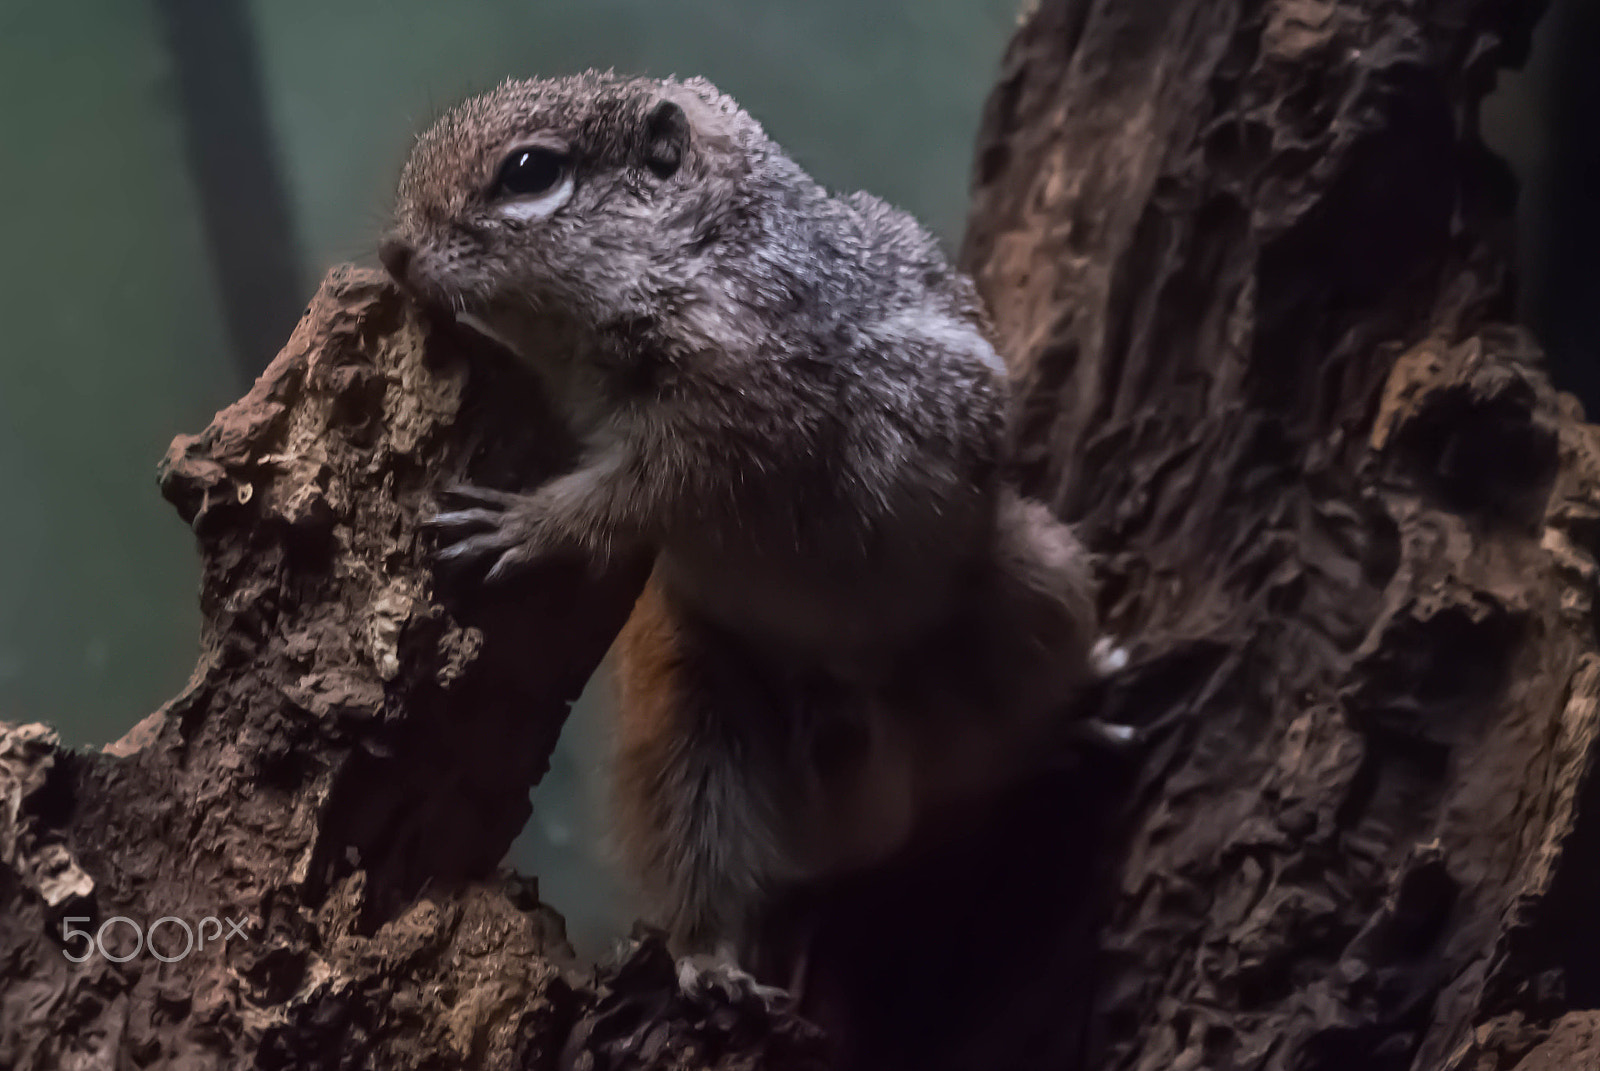 Sony a99 II + Minolta AF 100mm F2.8 Macro [New] sample photo. "harris's antelope squirrel" lives in rainforests photography